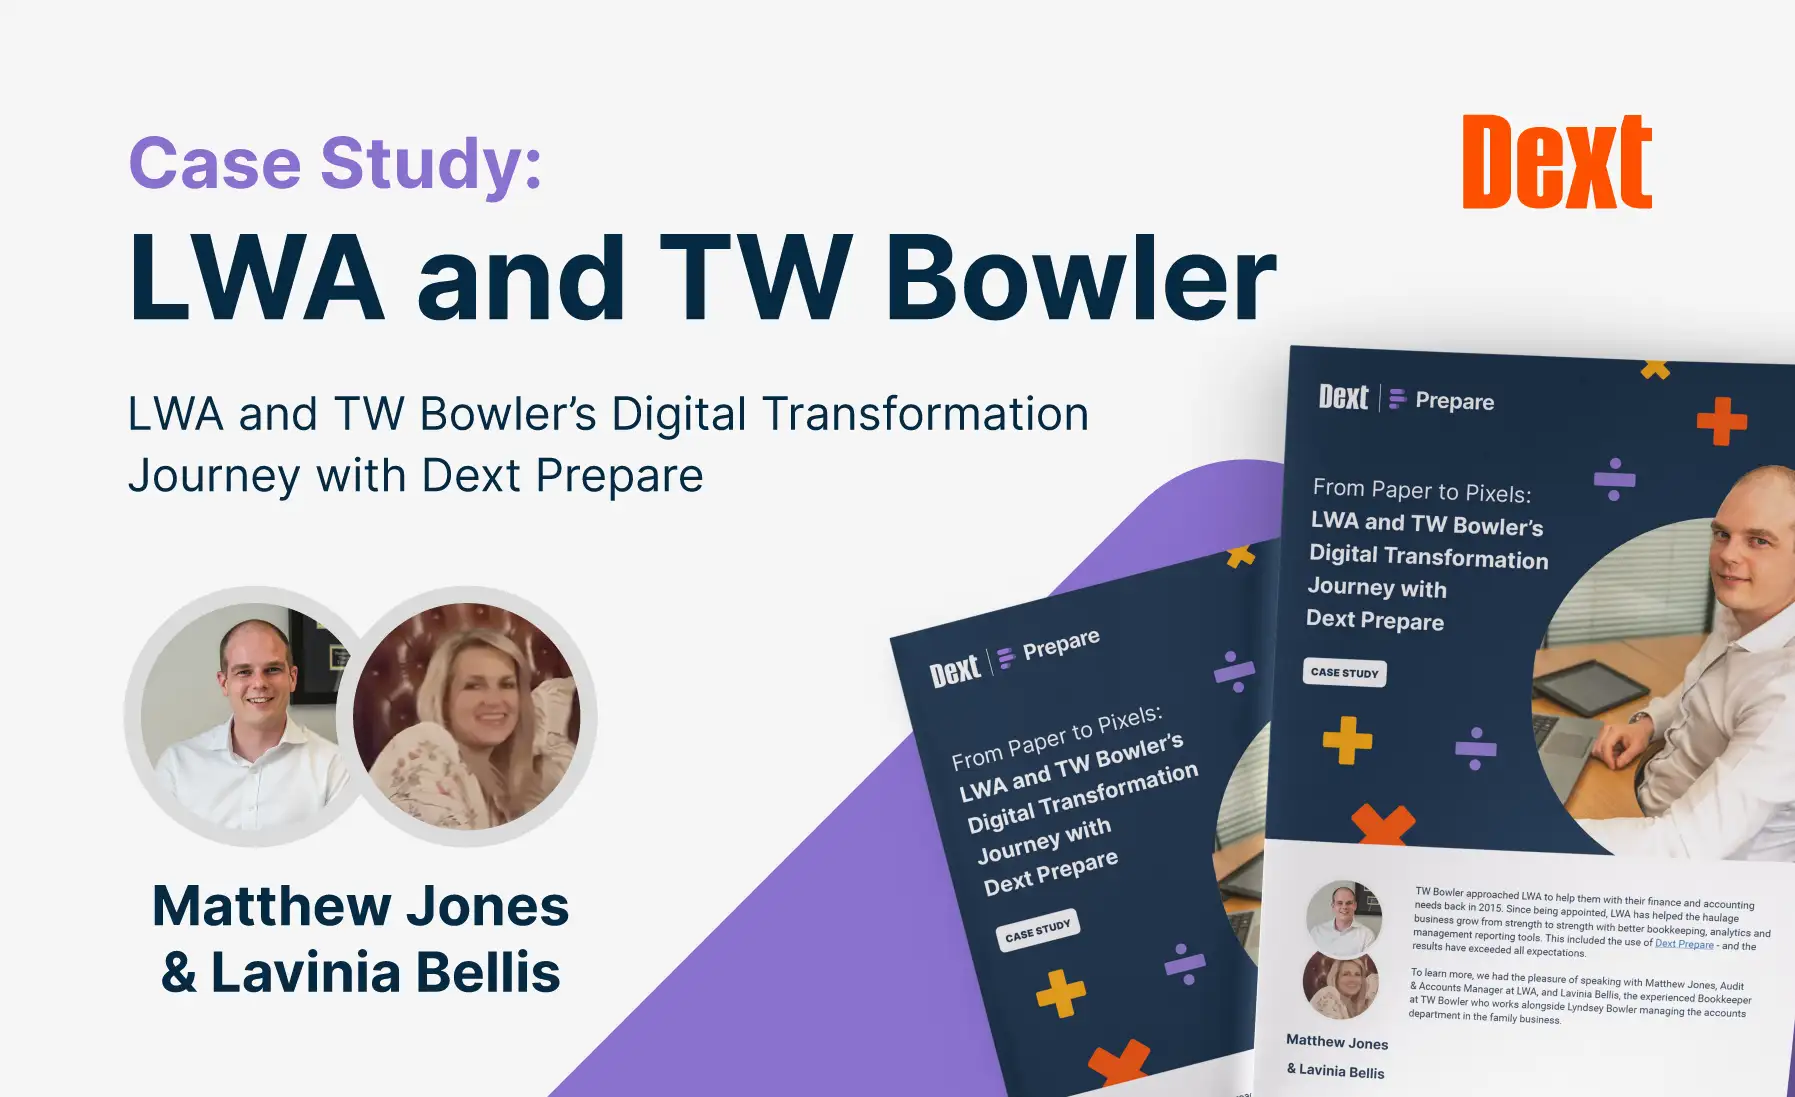 From Paper to Pixels: LWA and TW Bowler’s Digital Transformation Journey with Dext Prepare image